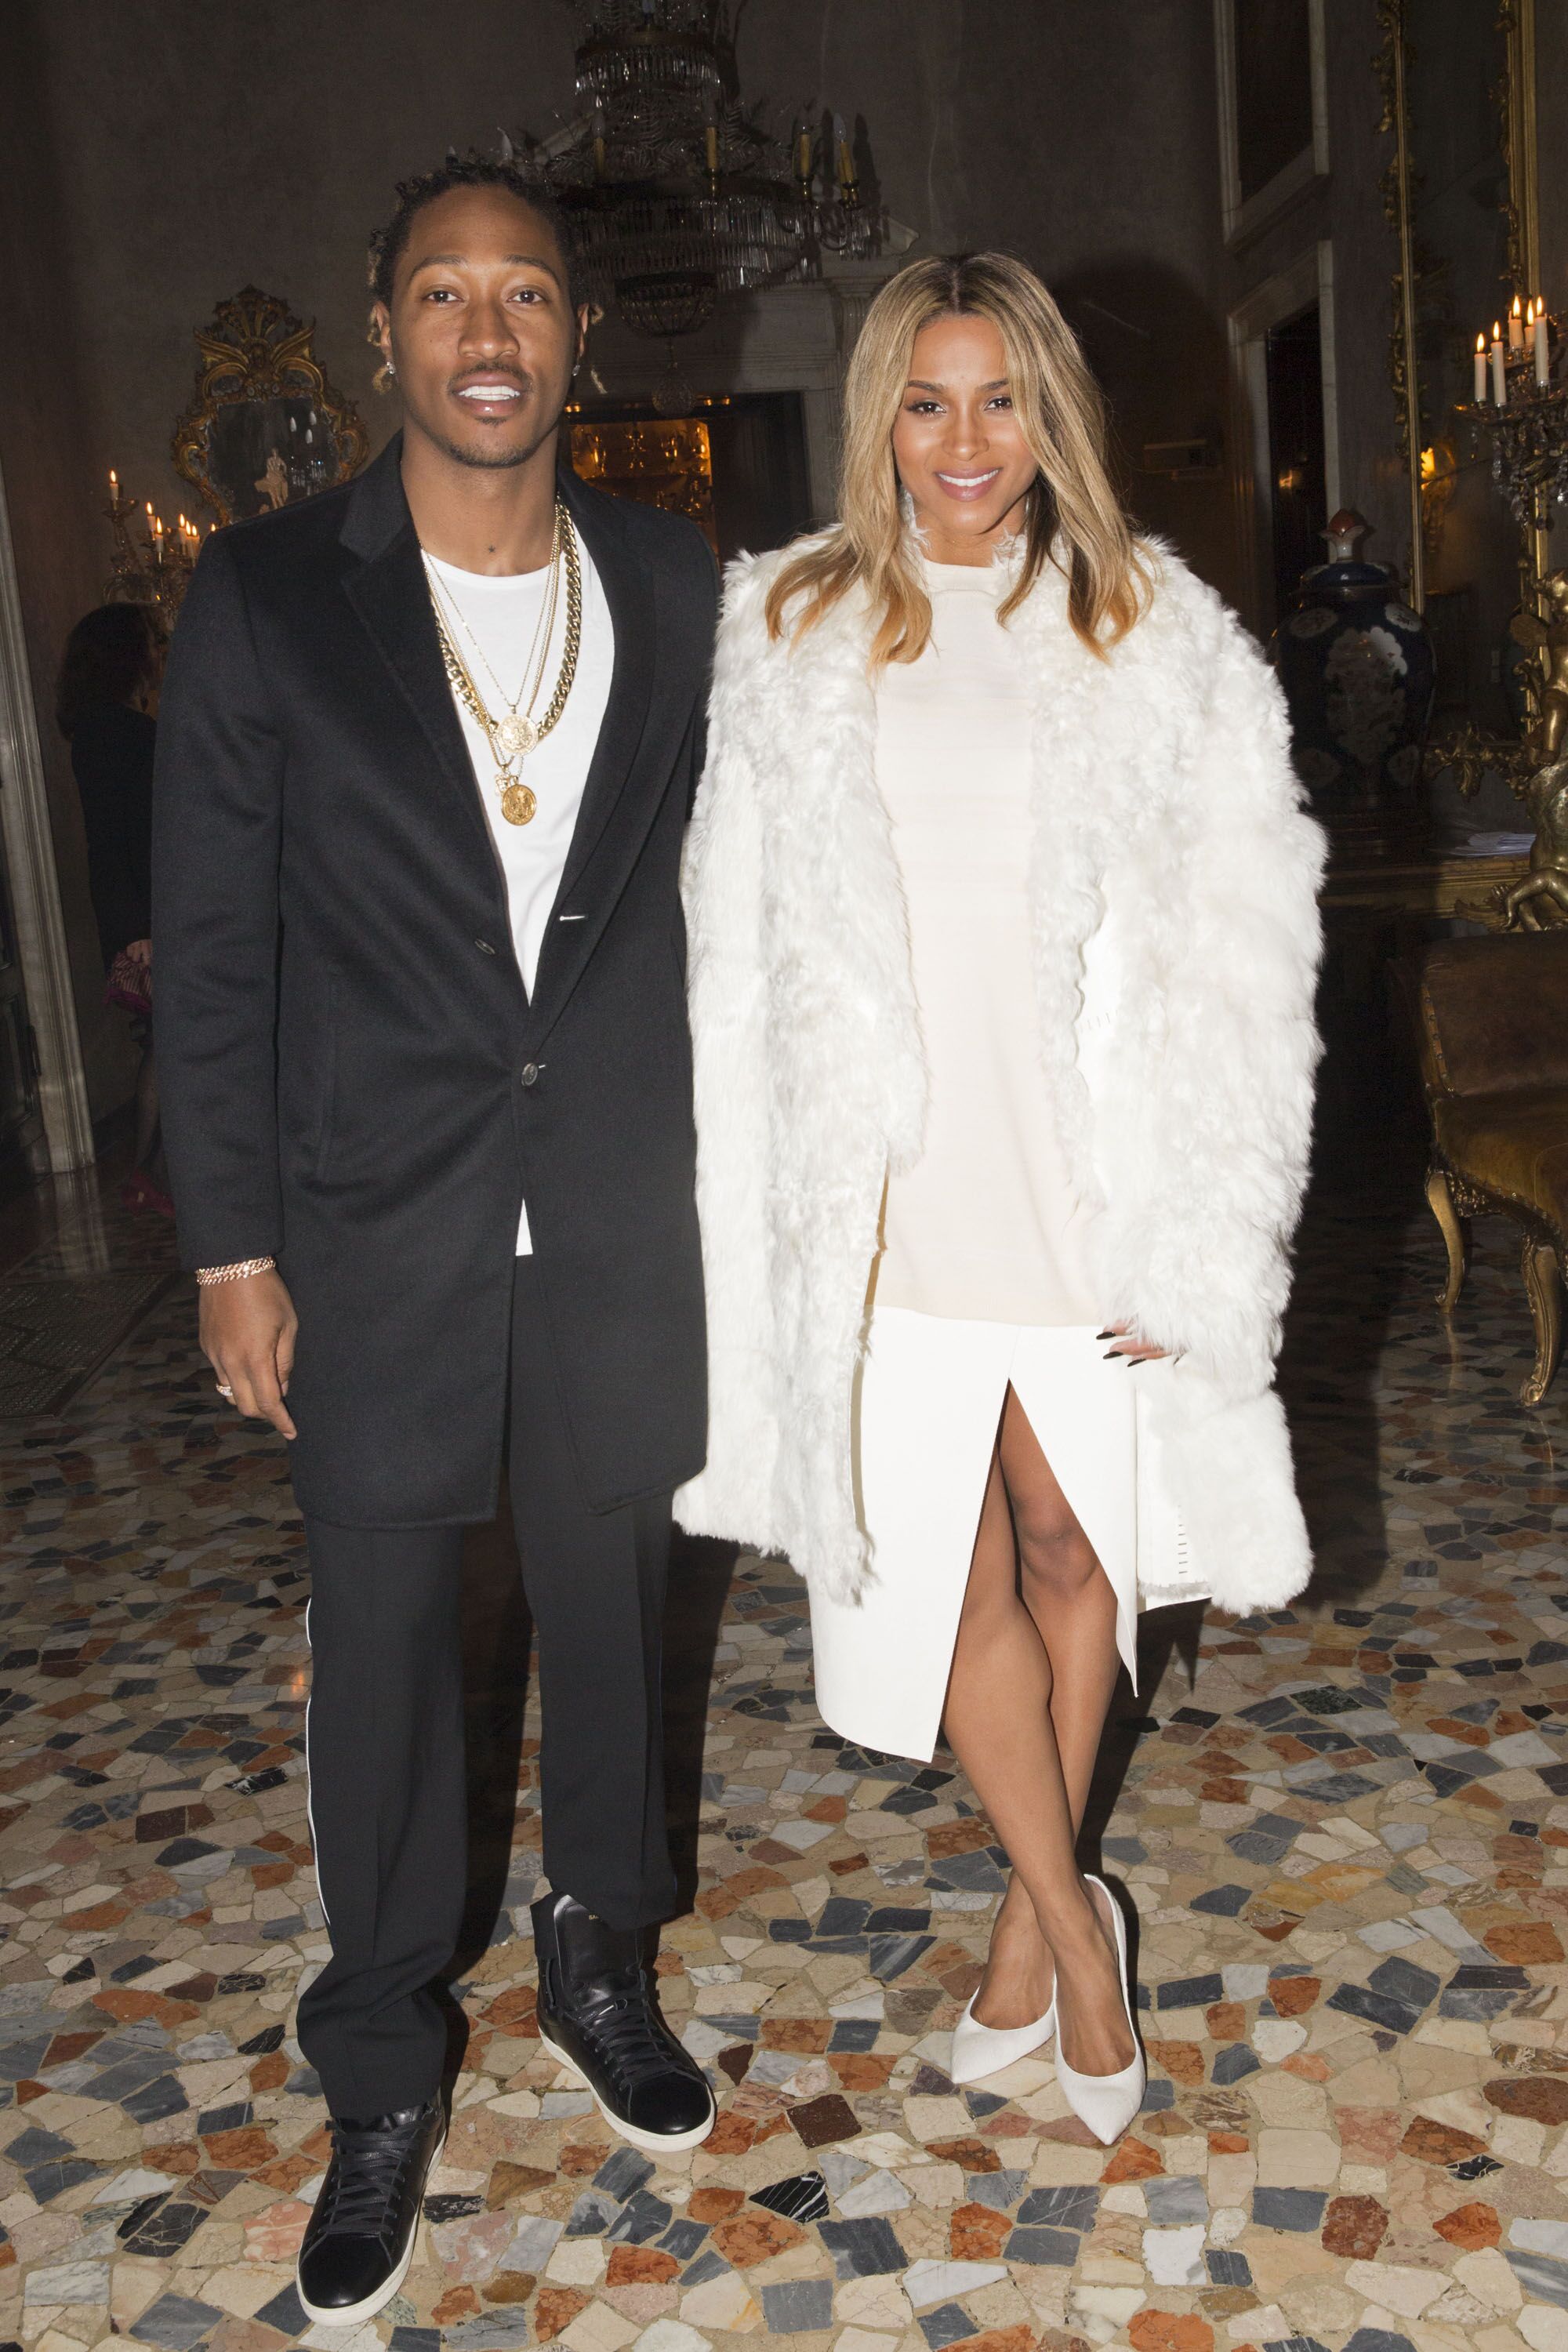 Future and Ciara attend the Calvin Klein Collection after party as a part of Milan Fashion Week Menswear Autumn/Winter 2014 at Palazzo Crespi on January 12, 2014 in Milan, Italy. | Source: Getty Images